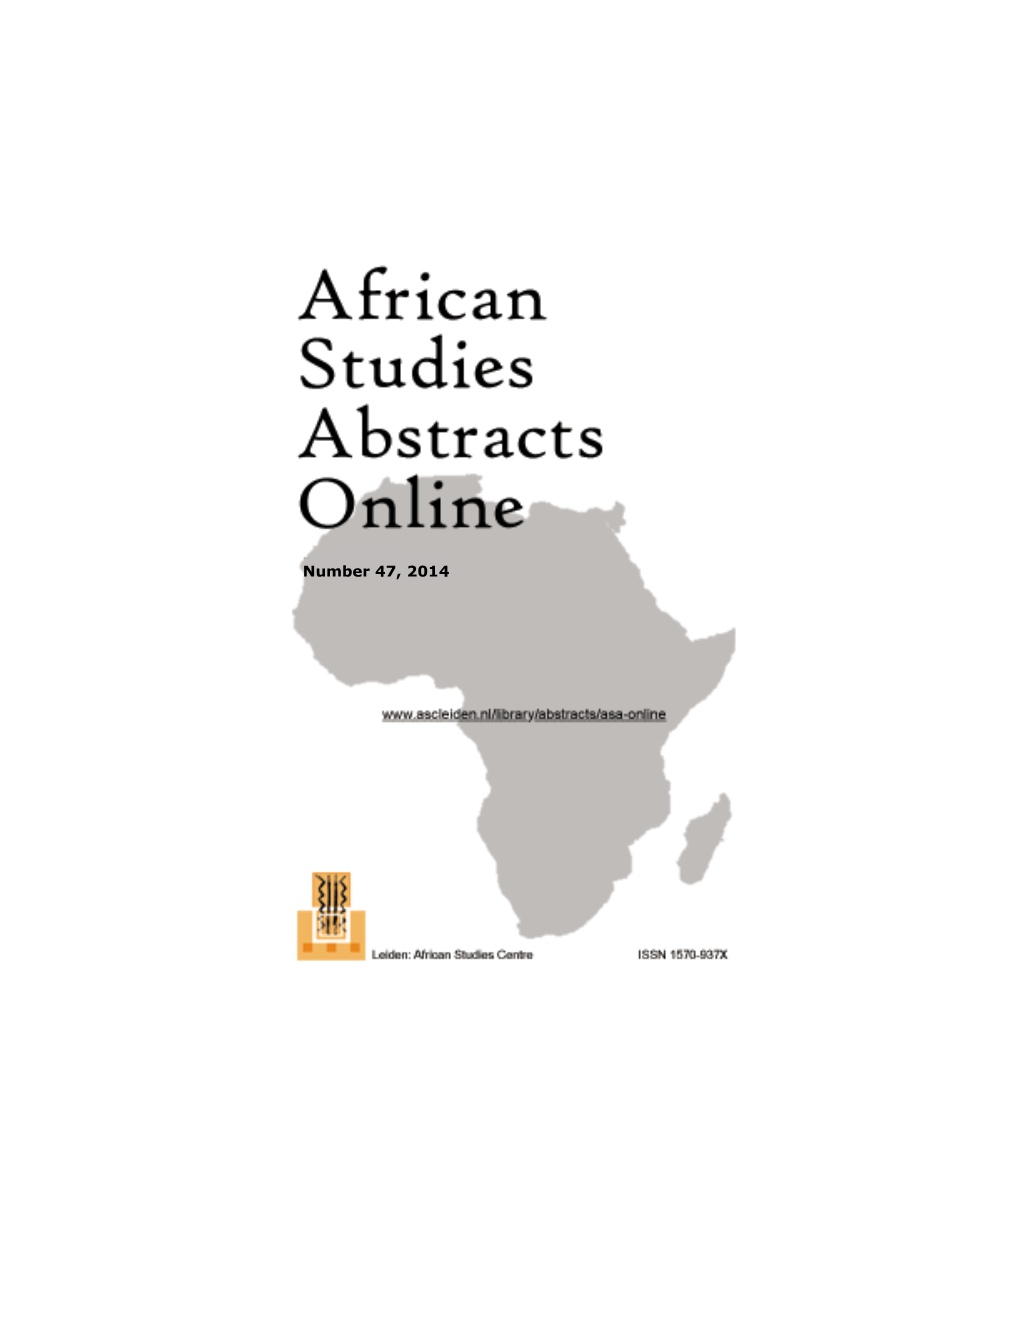 African Studies Abstracts Online: Number 47, 2014